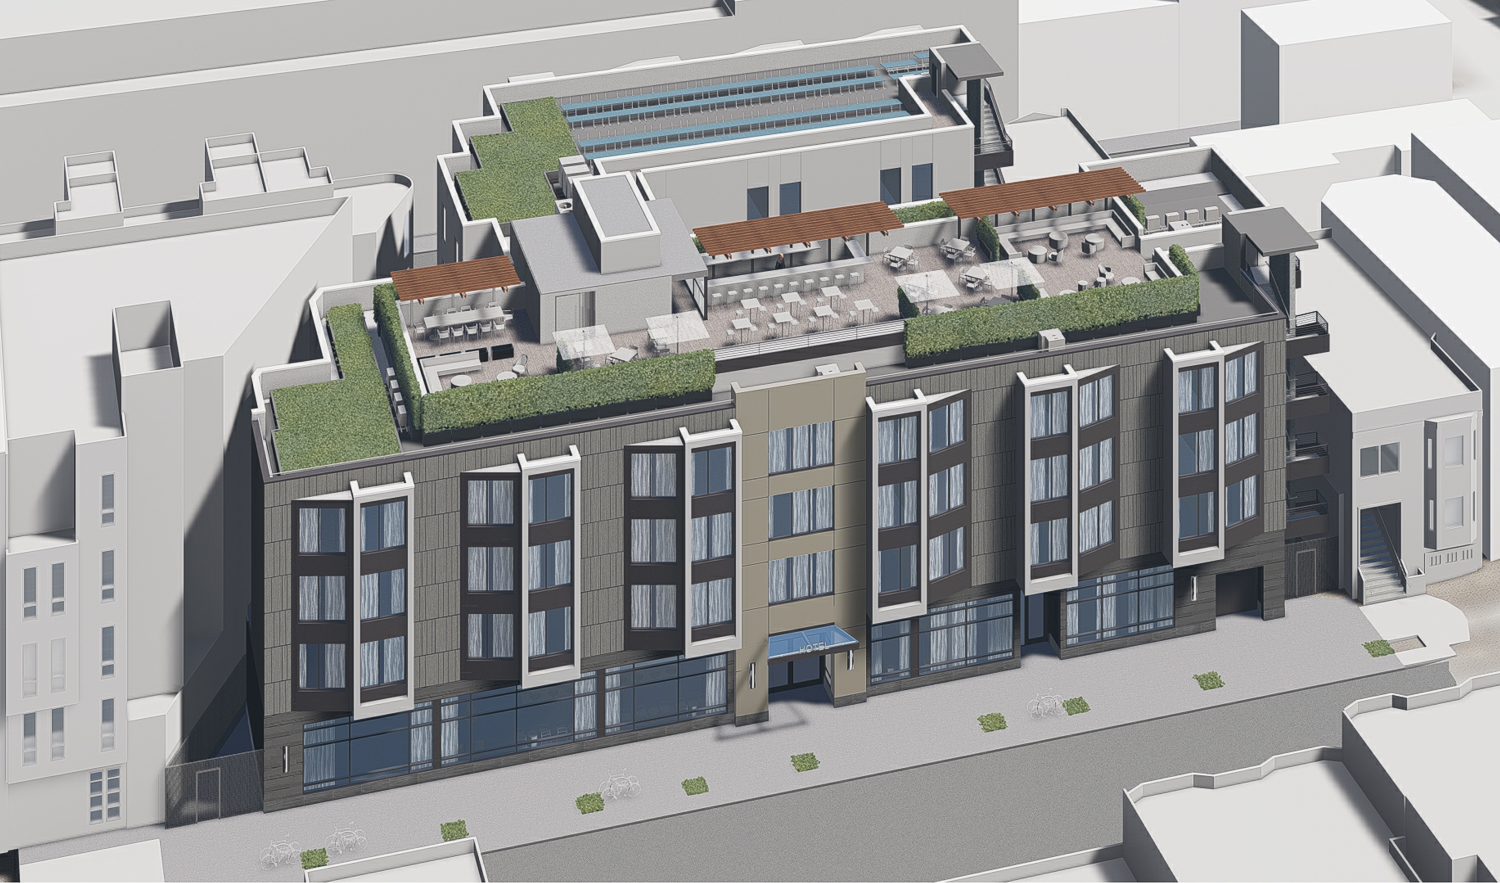 465 Grove Street aerial view, rendering by Stanton Architecture